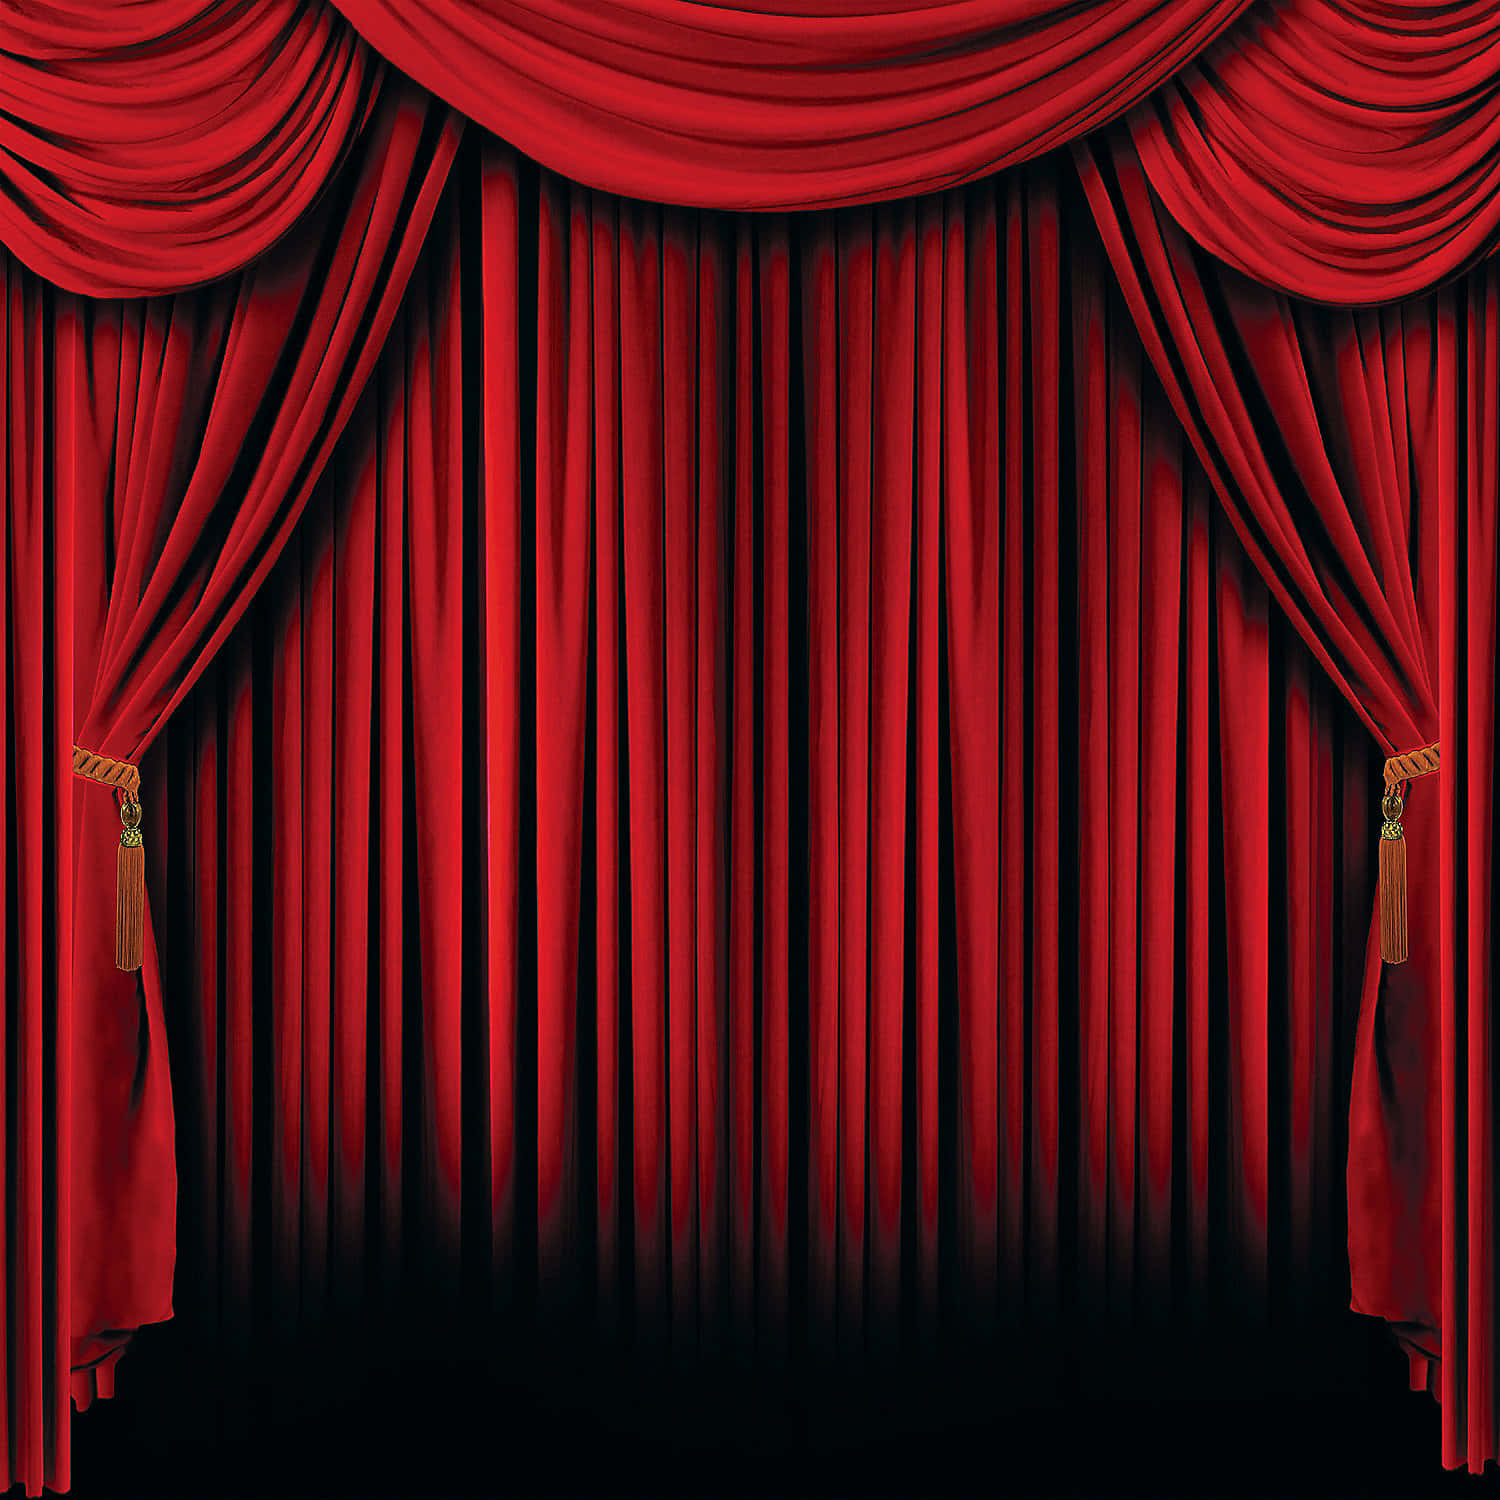 A dark red curtain fades over a stage